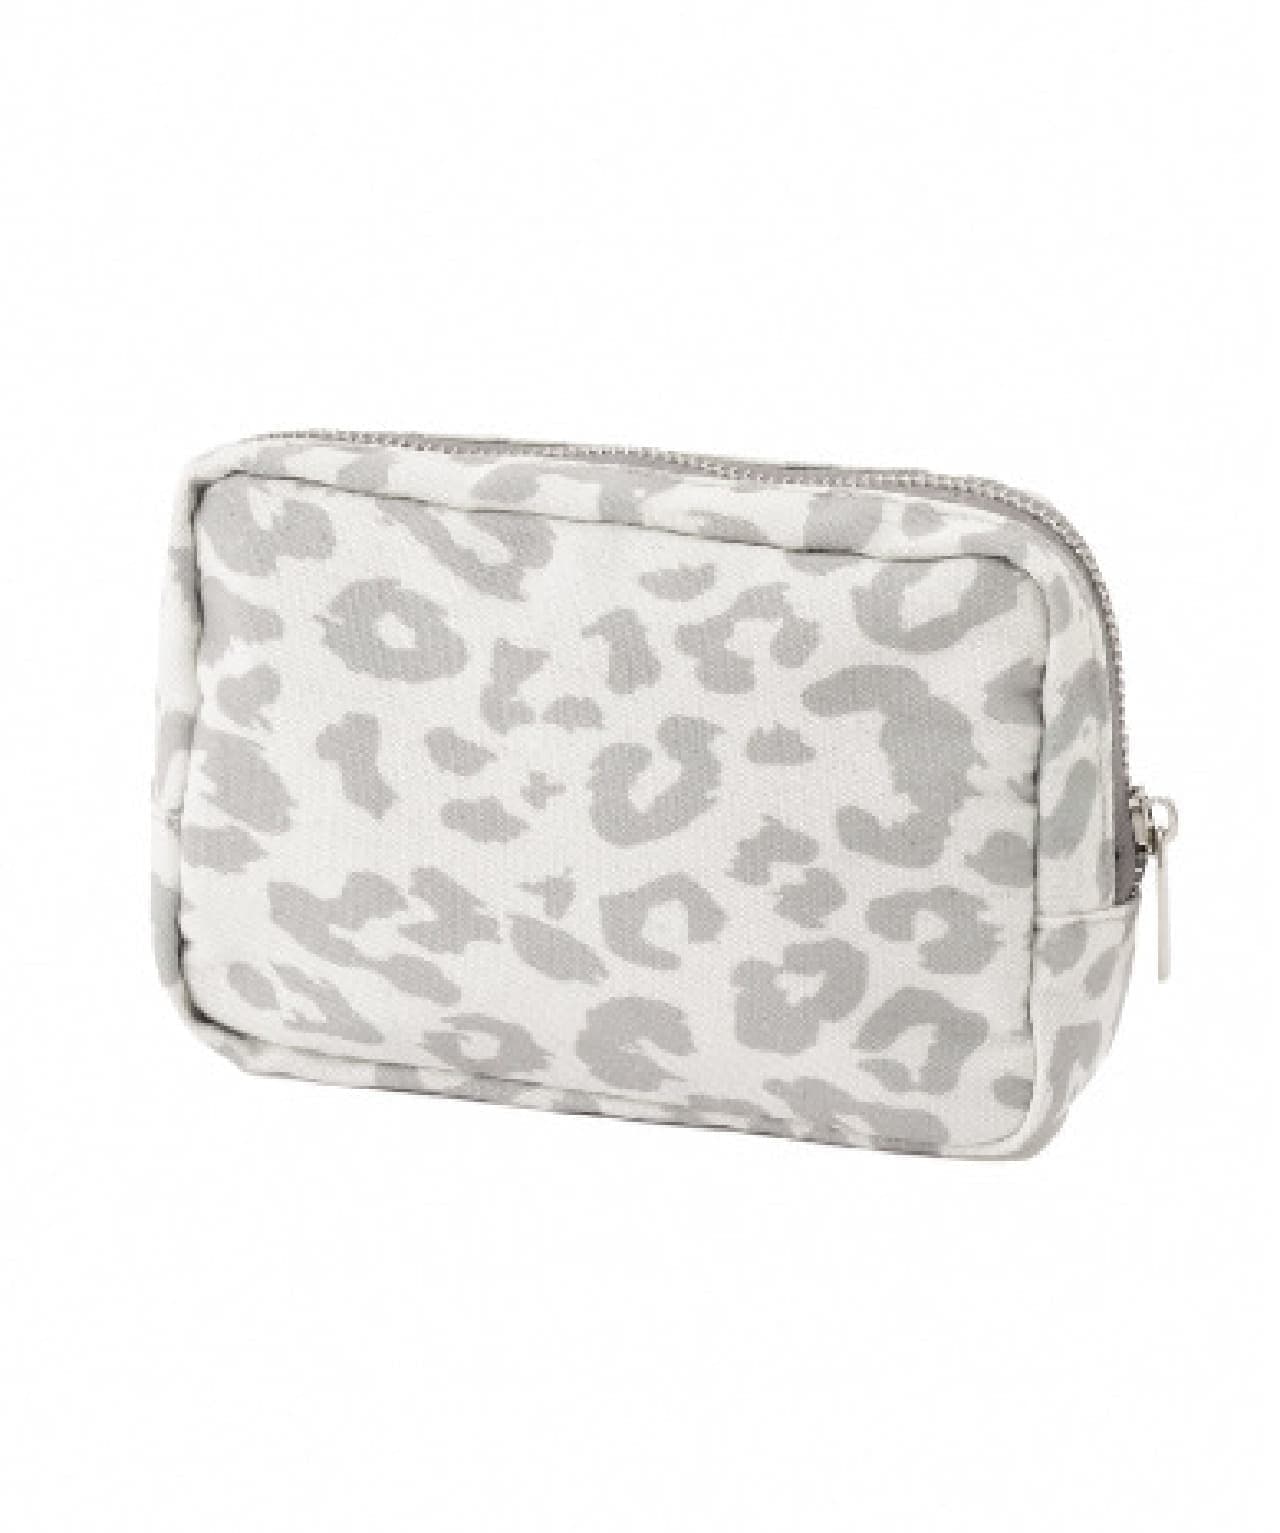 Animal pattern pouch image